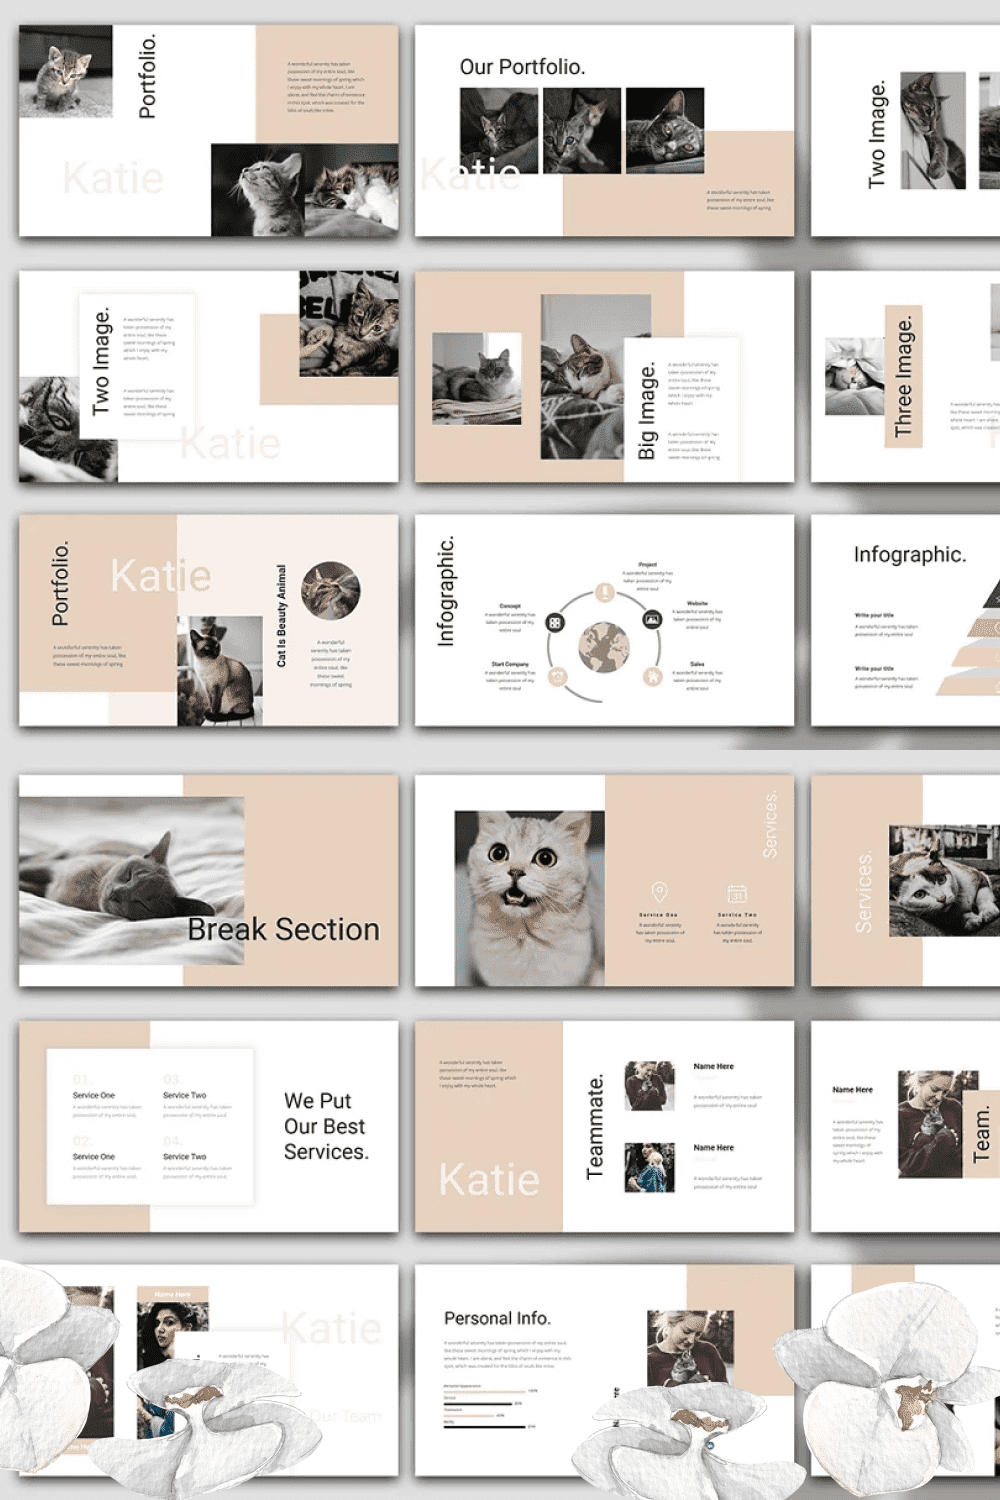 Katie. - Keynote Presentation Template - "We Put Our Best Services".